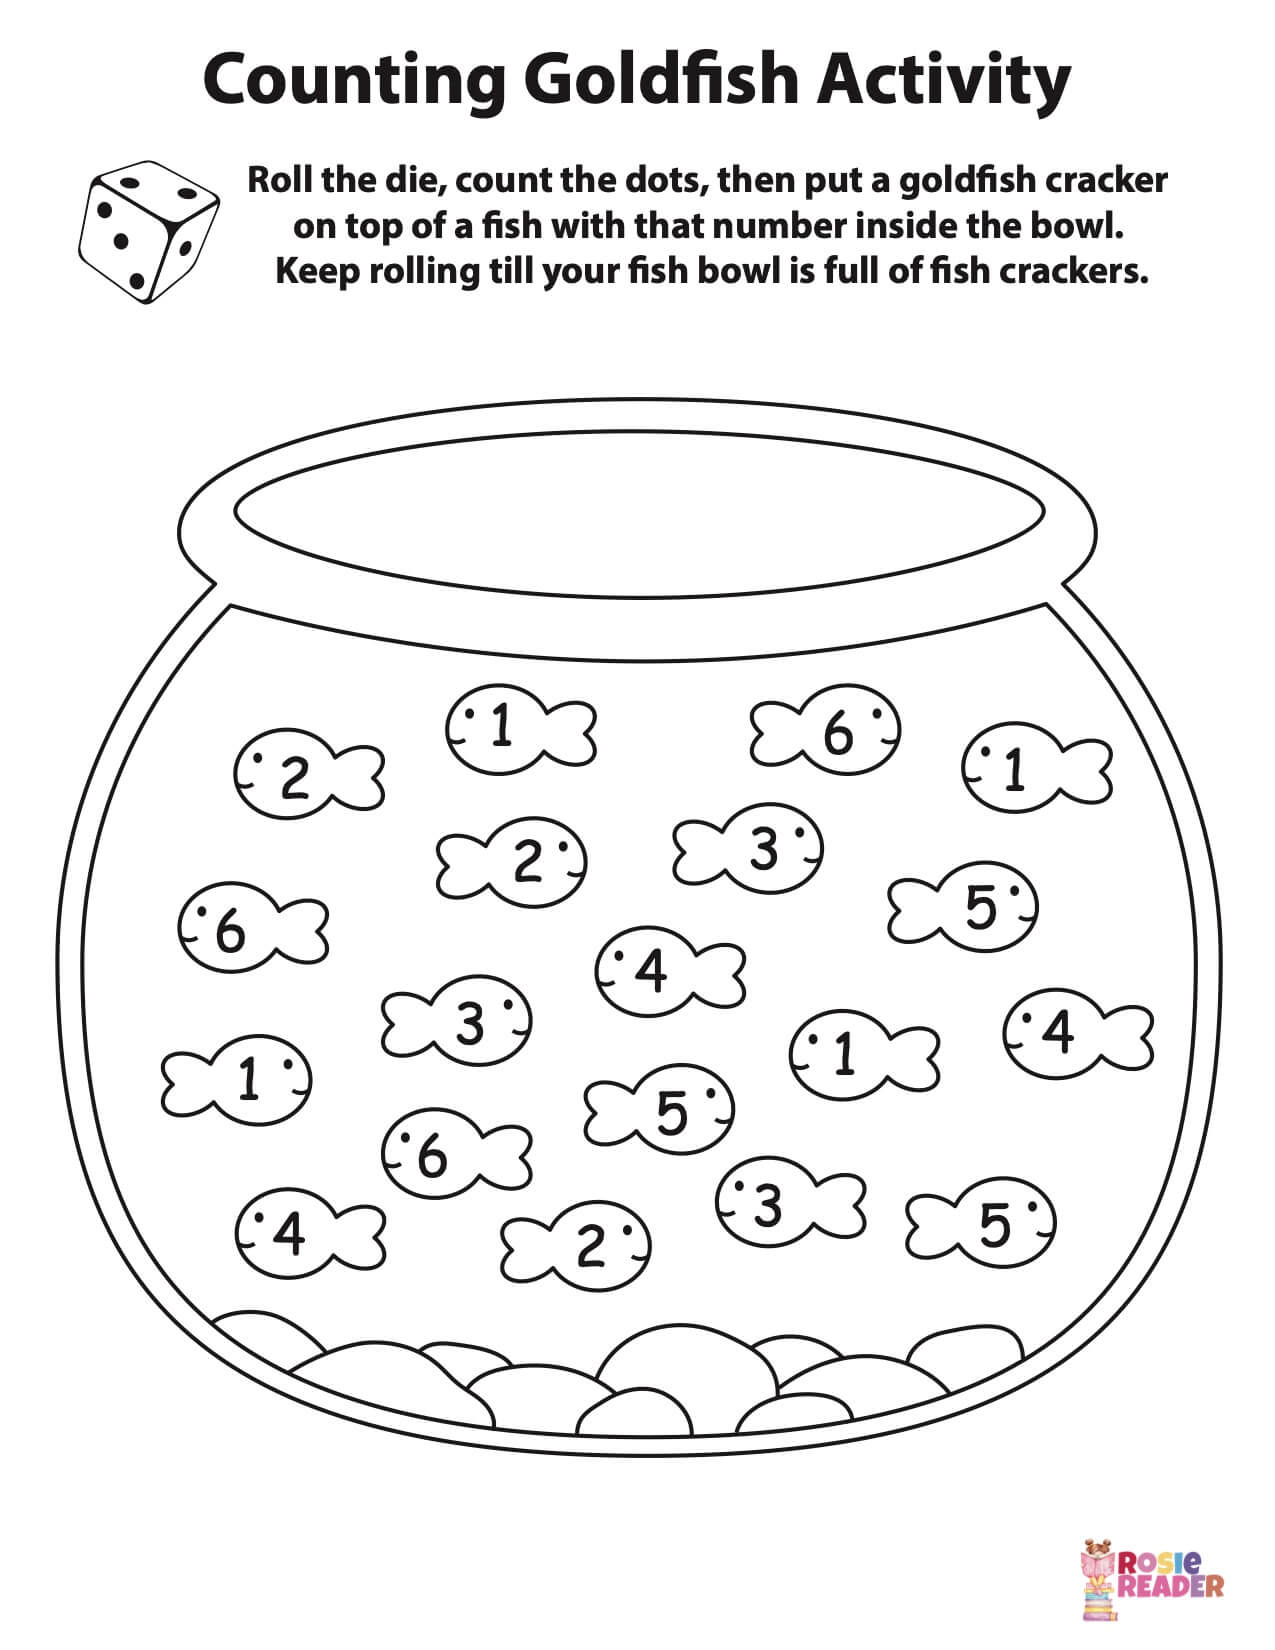 counting-goldfish-activity-printable-die-reading-adventures-for-kids-ages-3-to-5